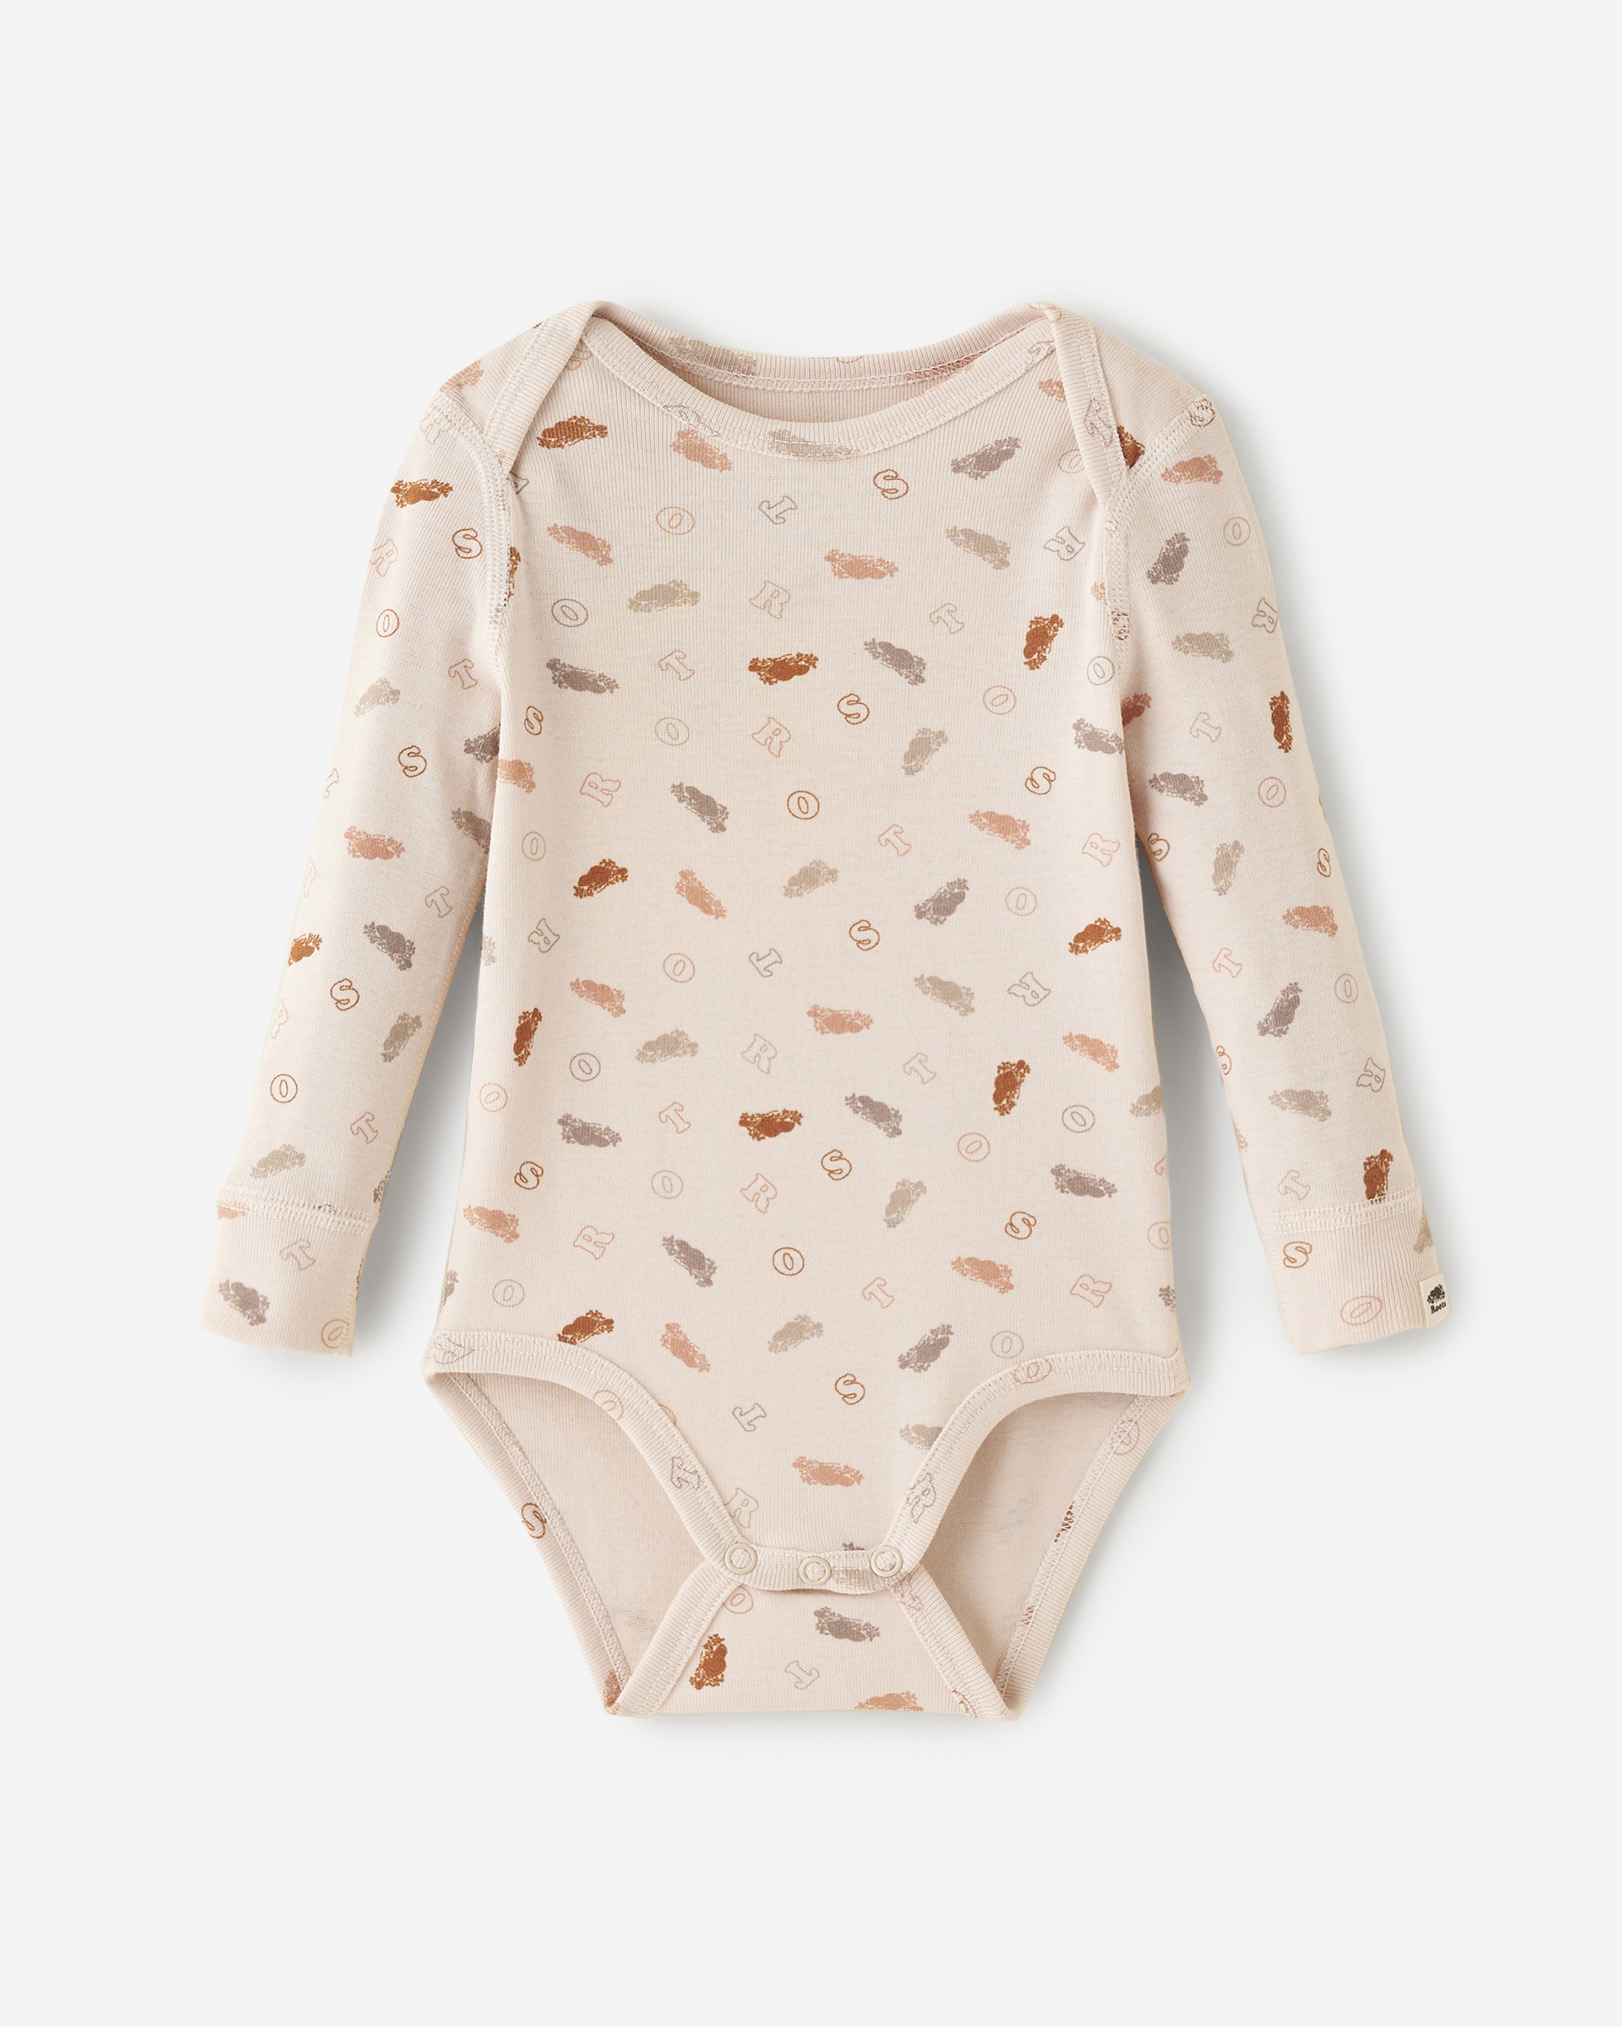 Roots Baby's First Bodysuit in Almond Peach